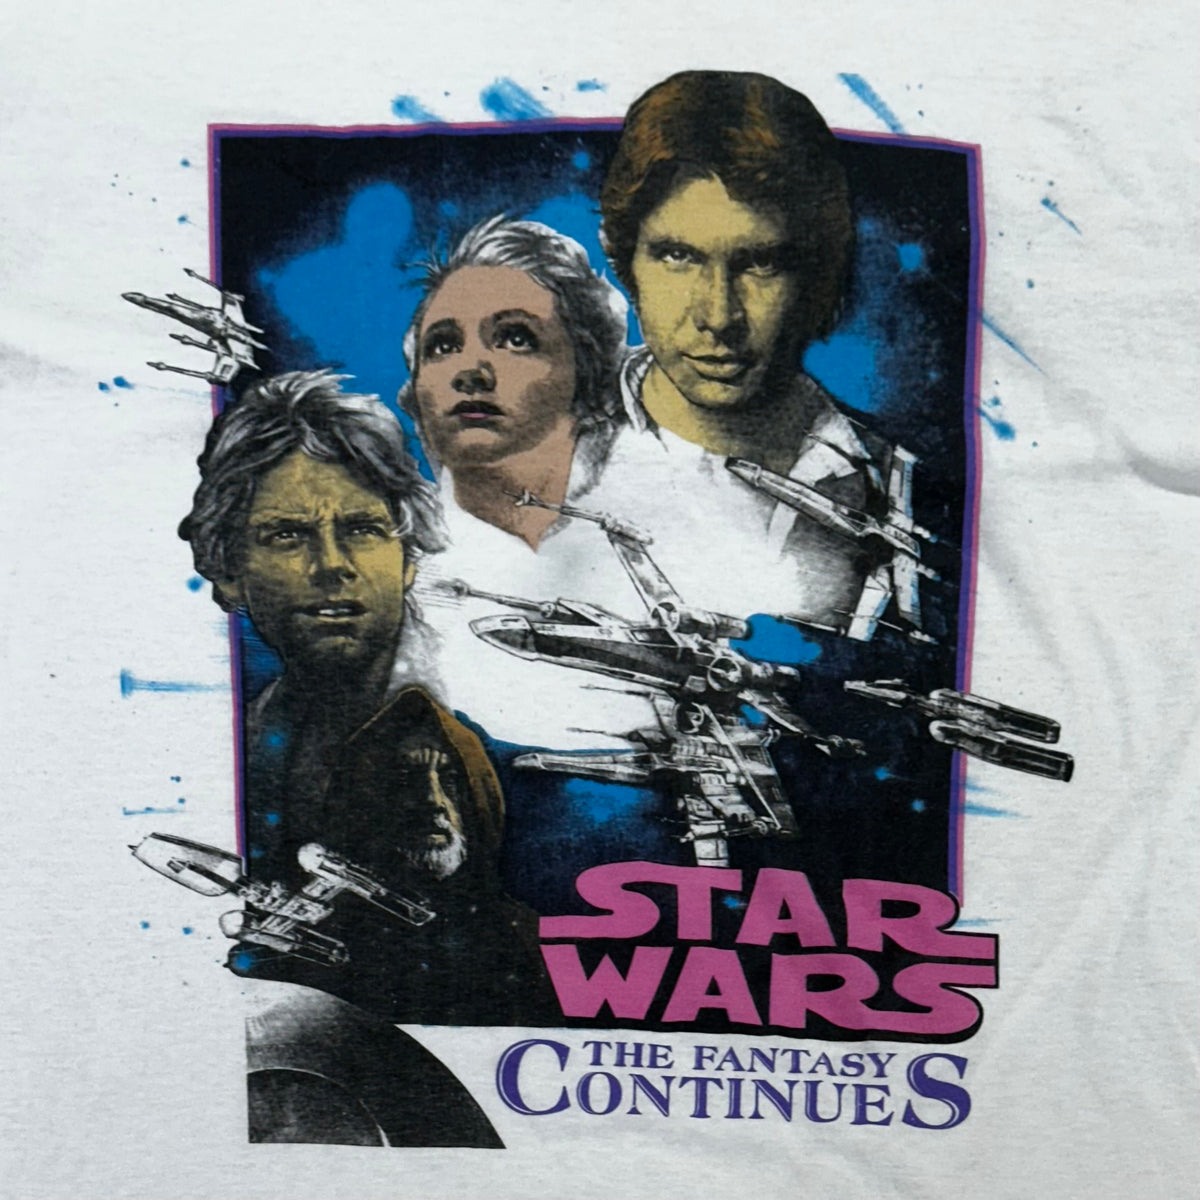 Vintage 90s Star Wars The Fantasy Continues Movie promo t-shirt